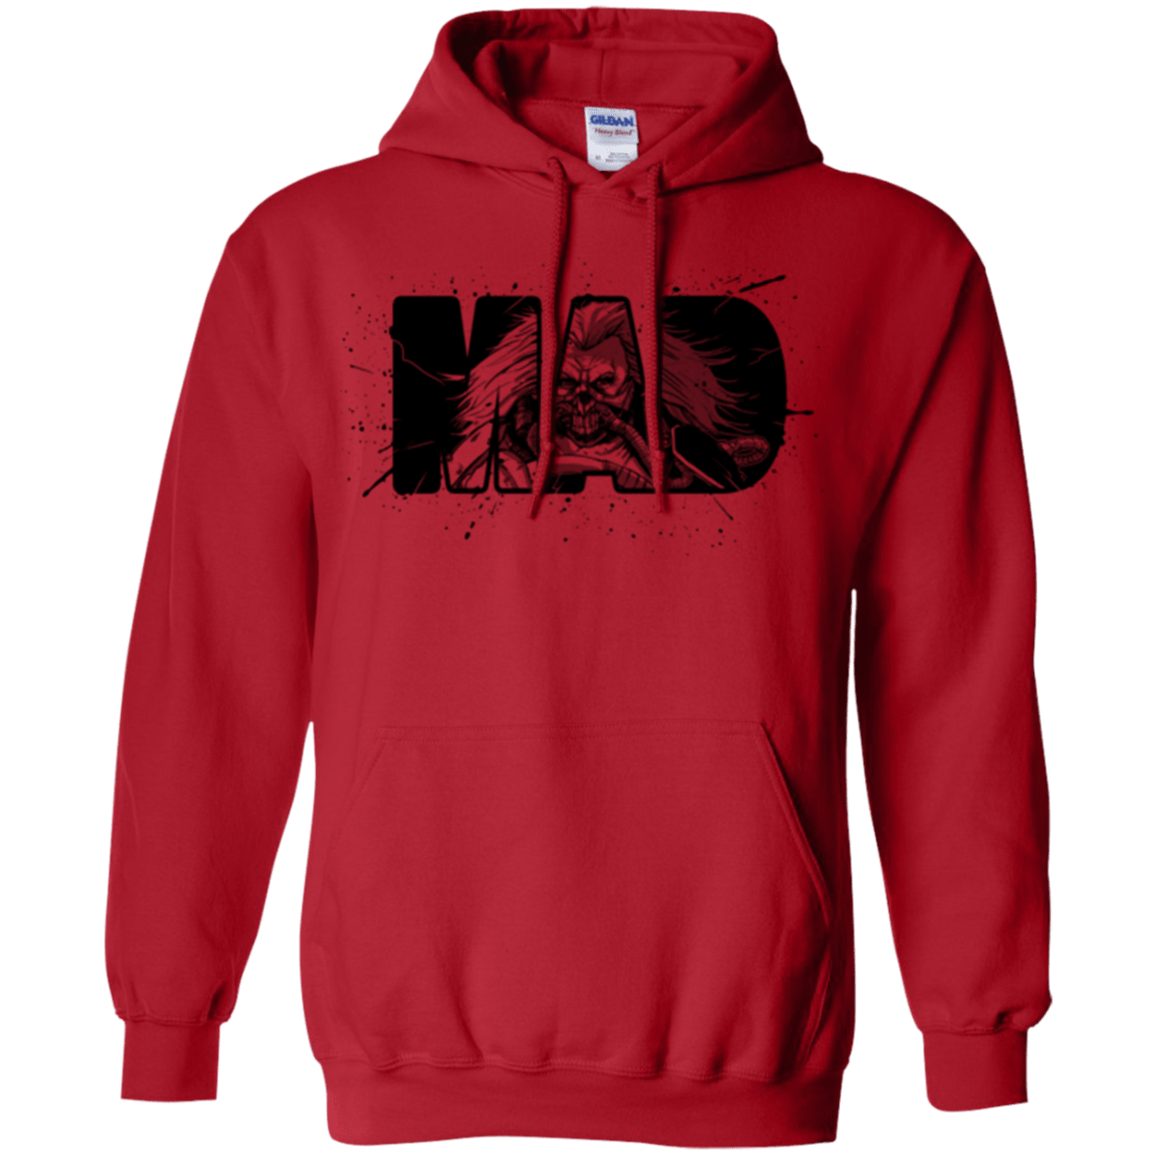 Sweatshirts Red / Small MAD Pullover Hoodie